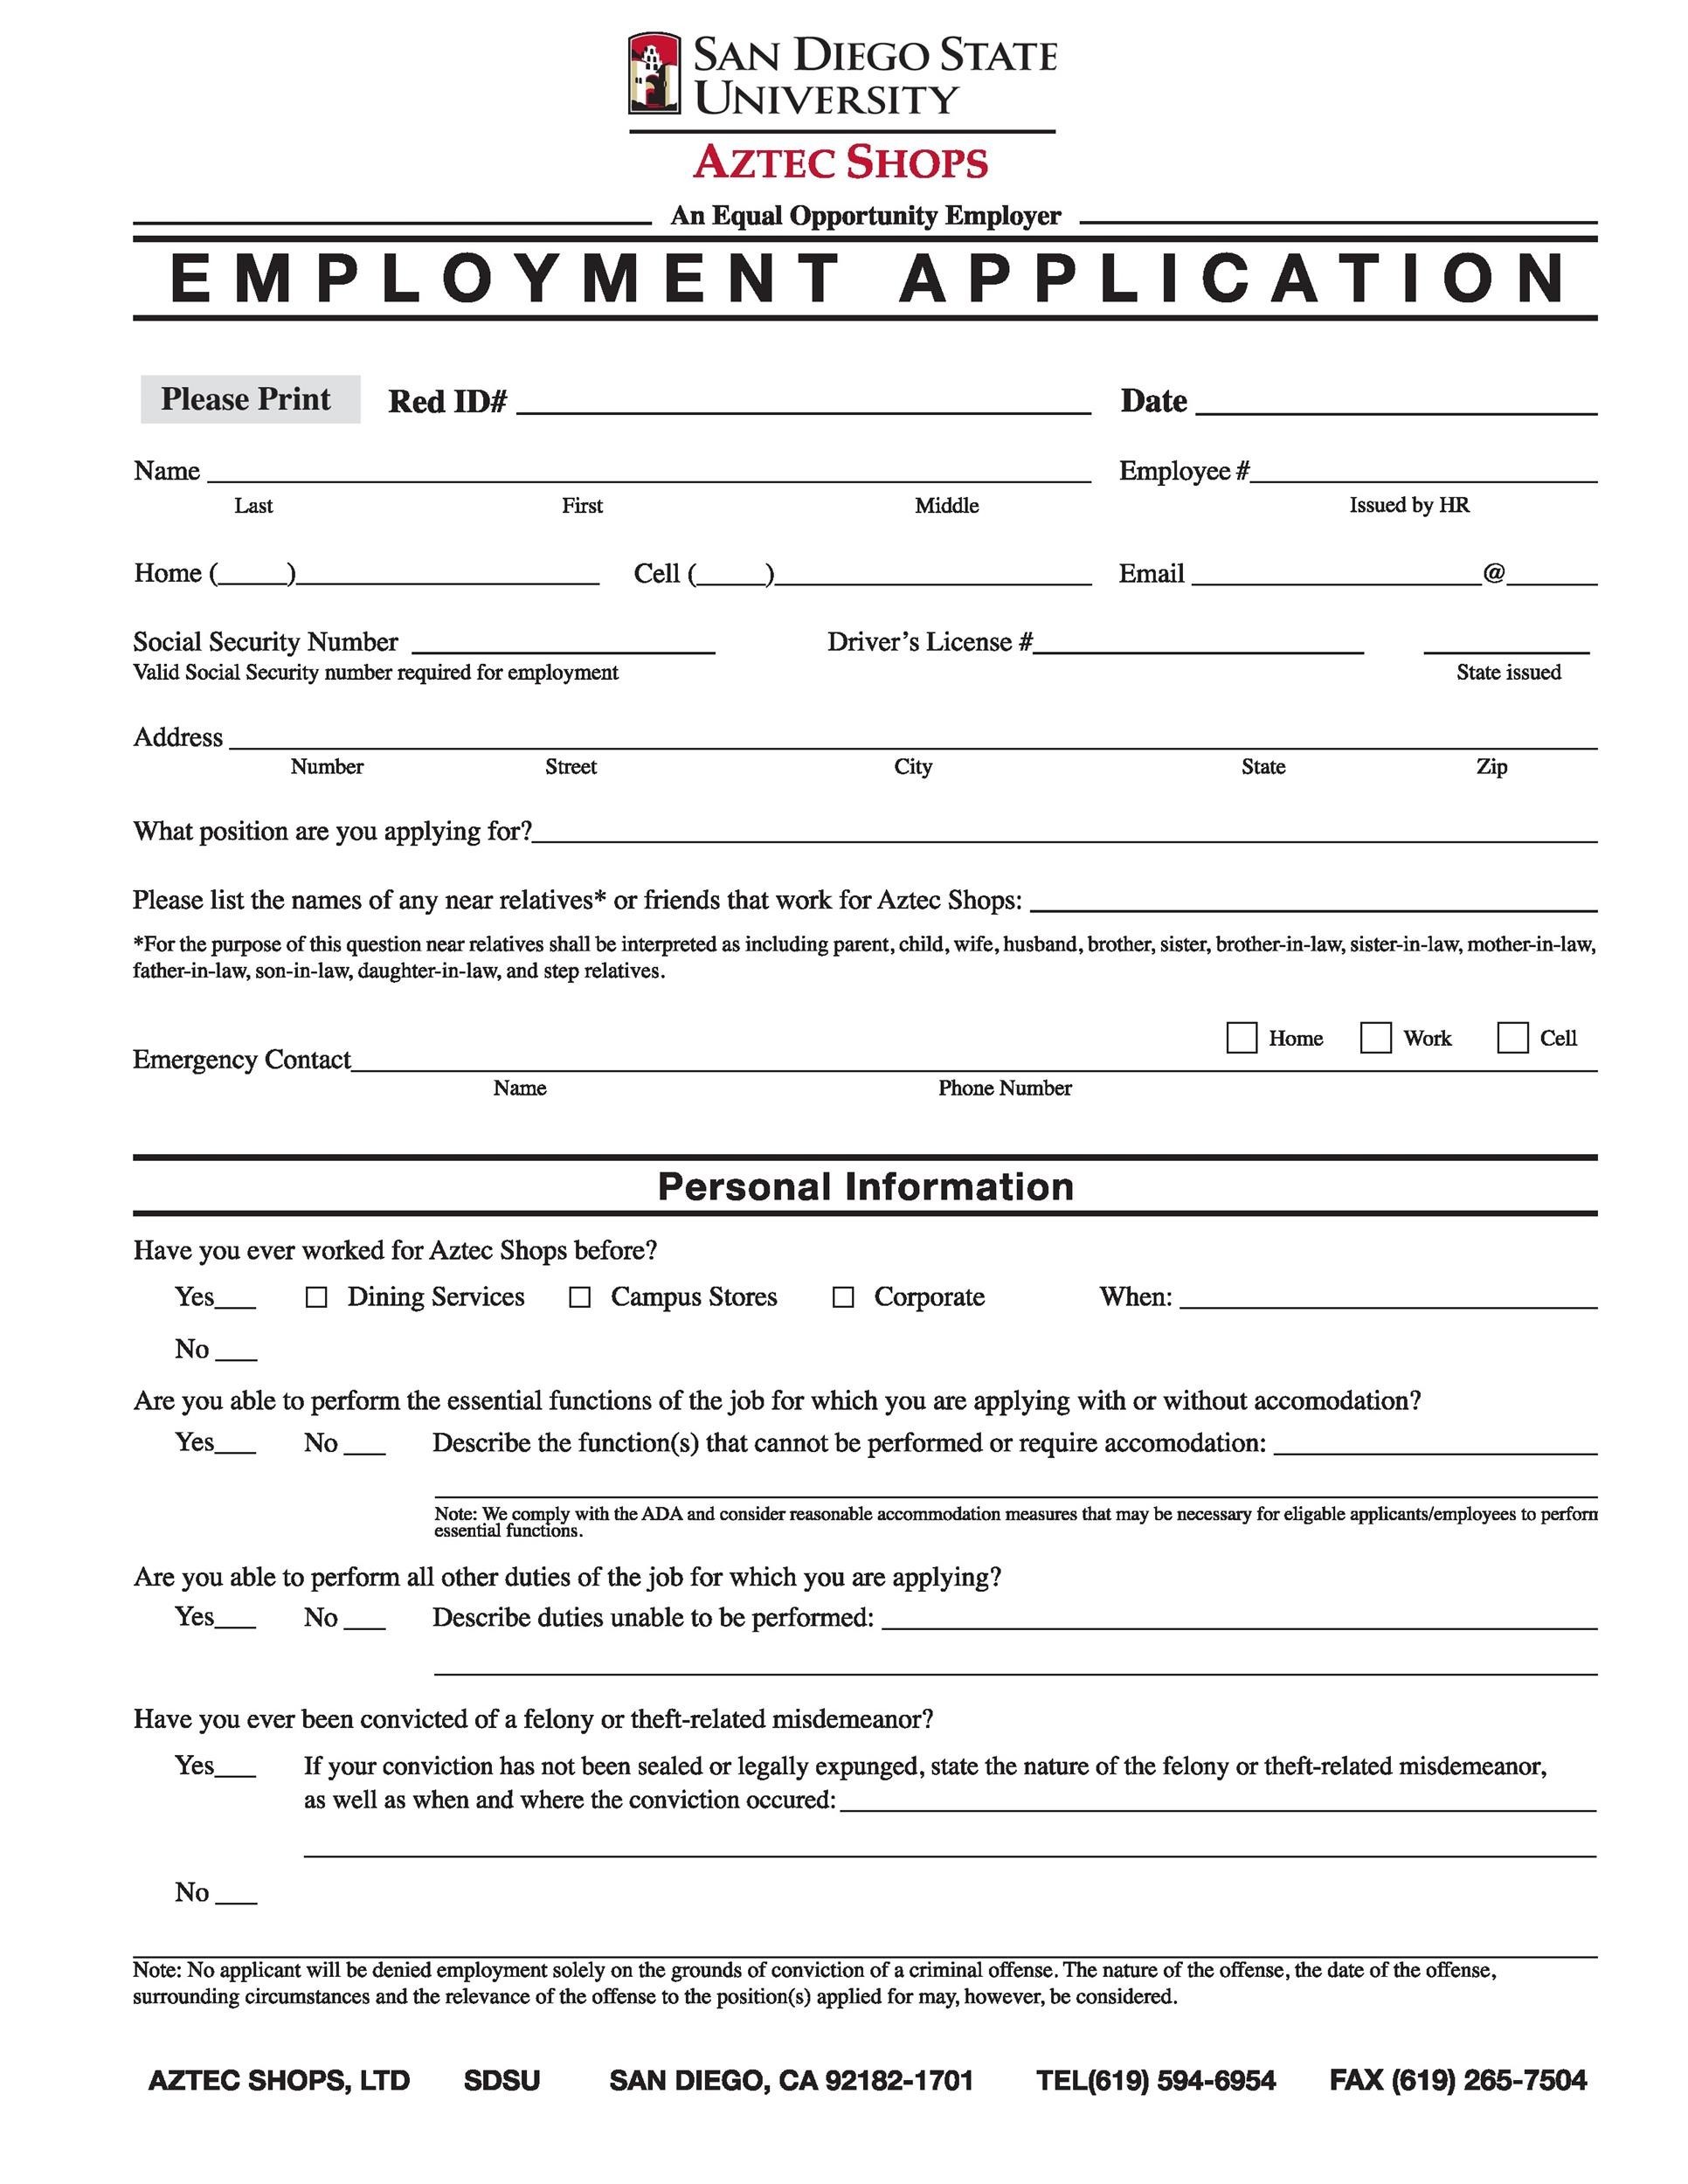 the-employment-application-form-is-shown-in-black-and-white